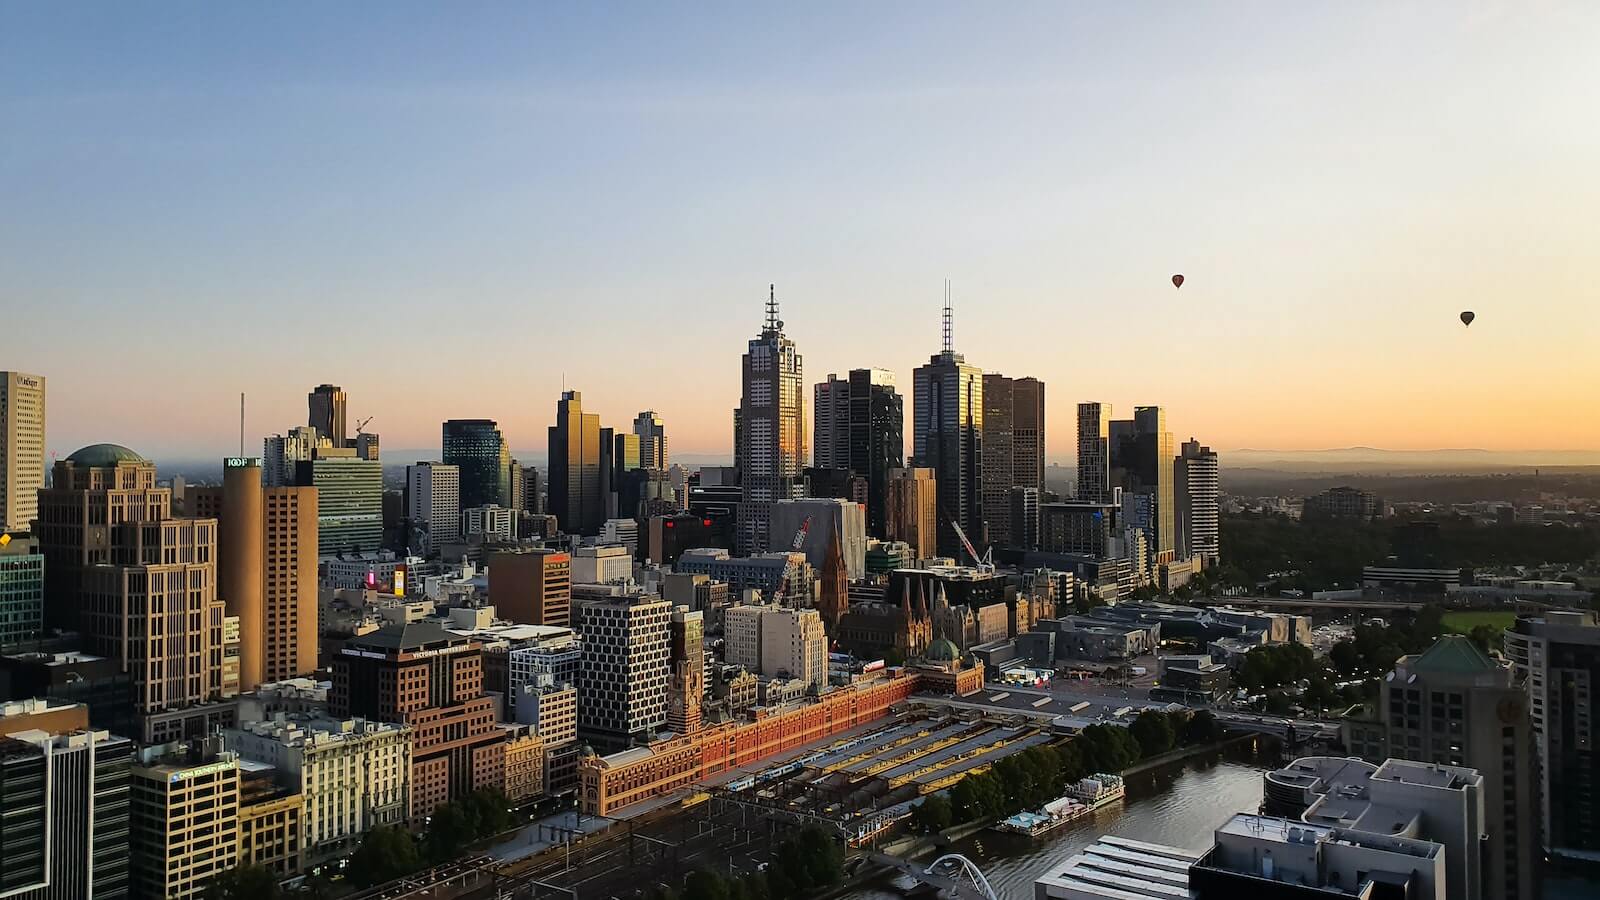 Melbourne city skyline during day time